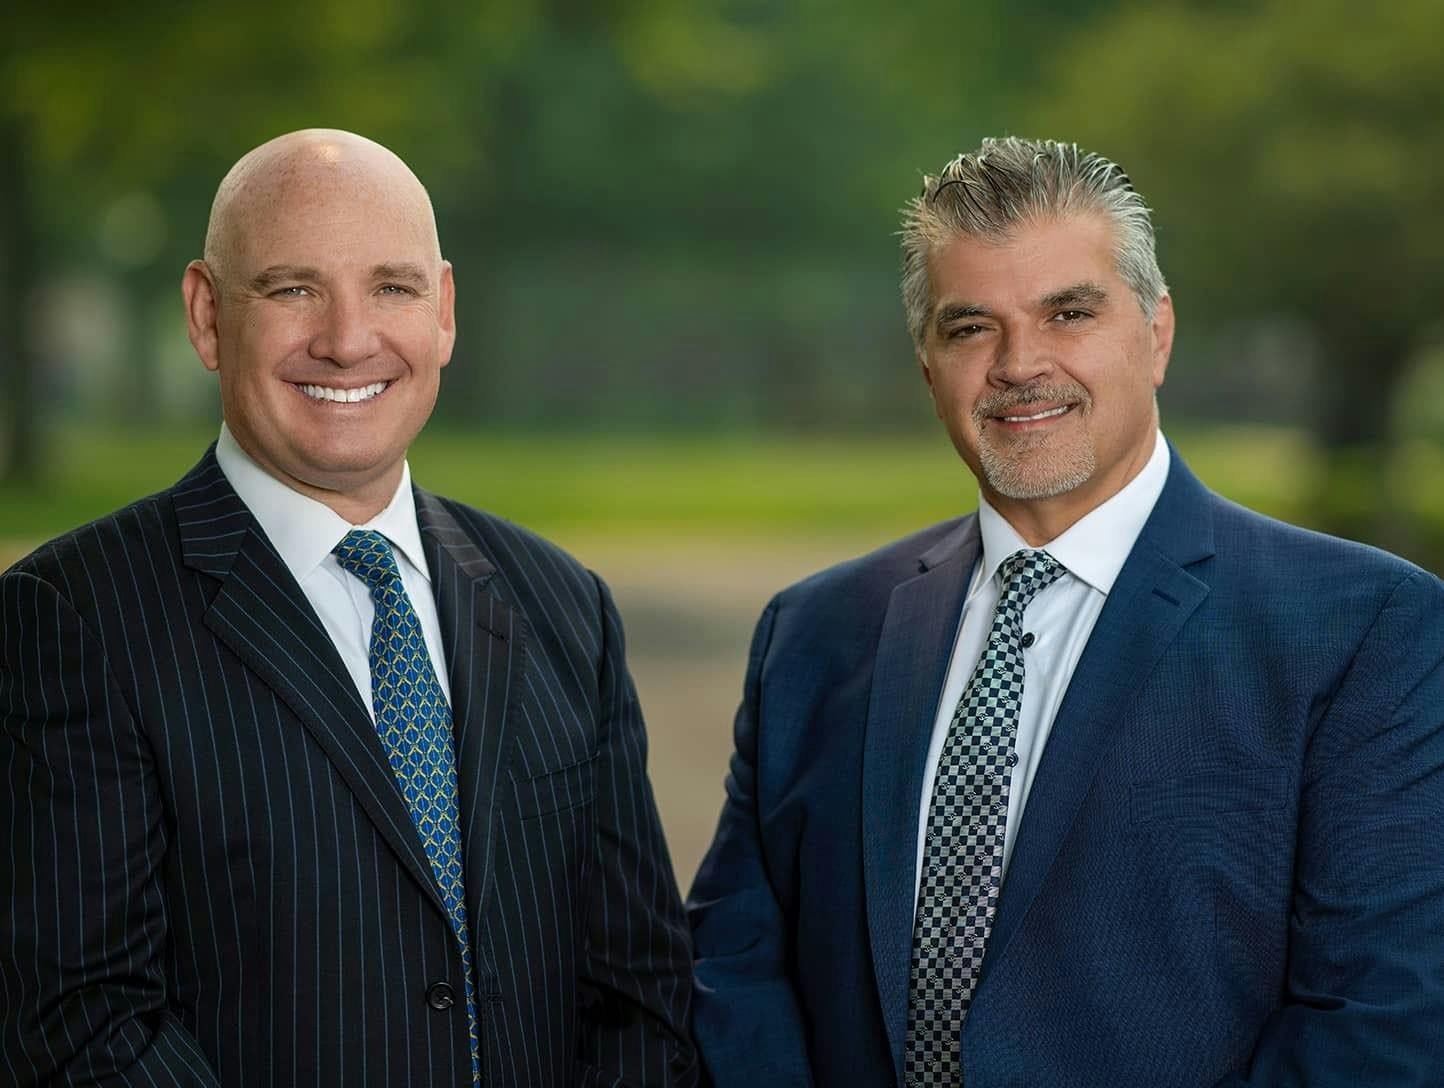 Dr. Steve Paragioudakis and Dr. Marc S. Menkowitz smiling and wearing suits